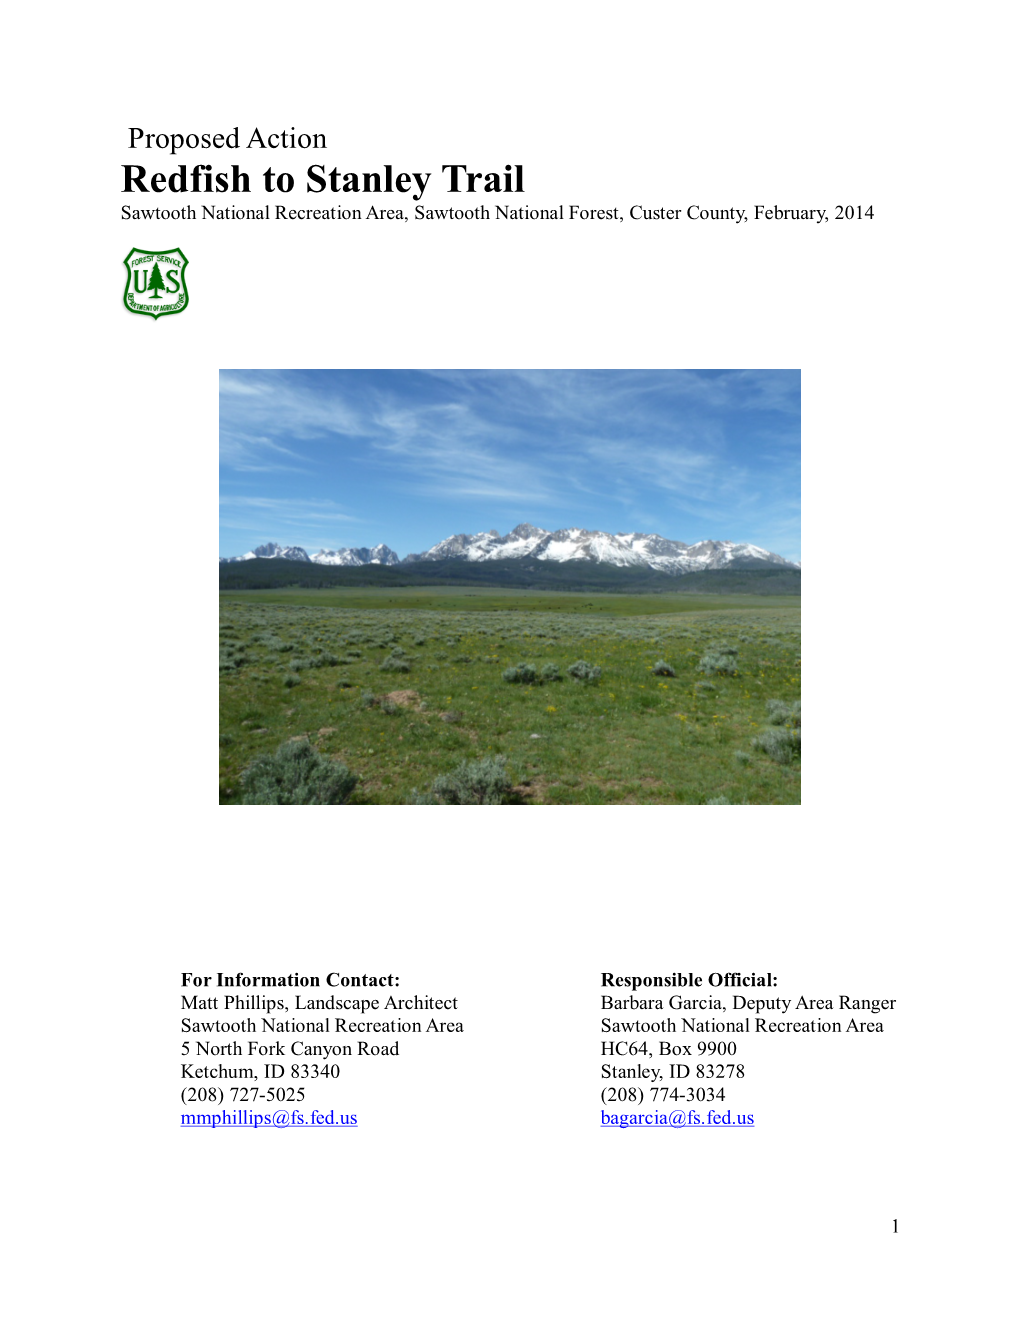 Redfish to Stanley Trail Sawtooth National Recreation Area, Sawtooth National Forest, Custer County, February, 2014